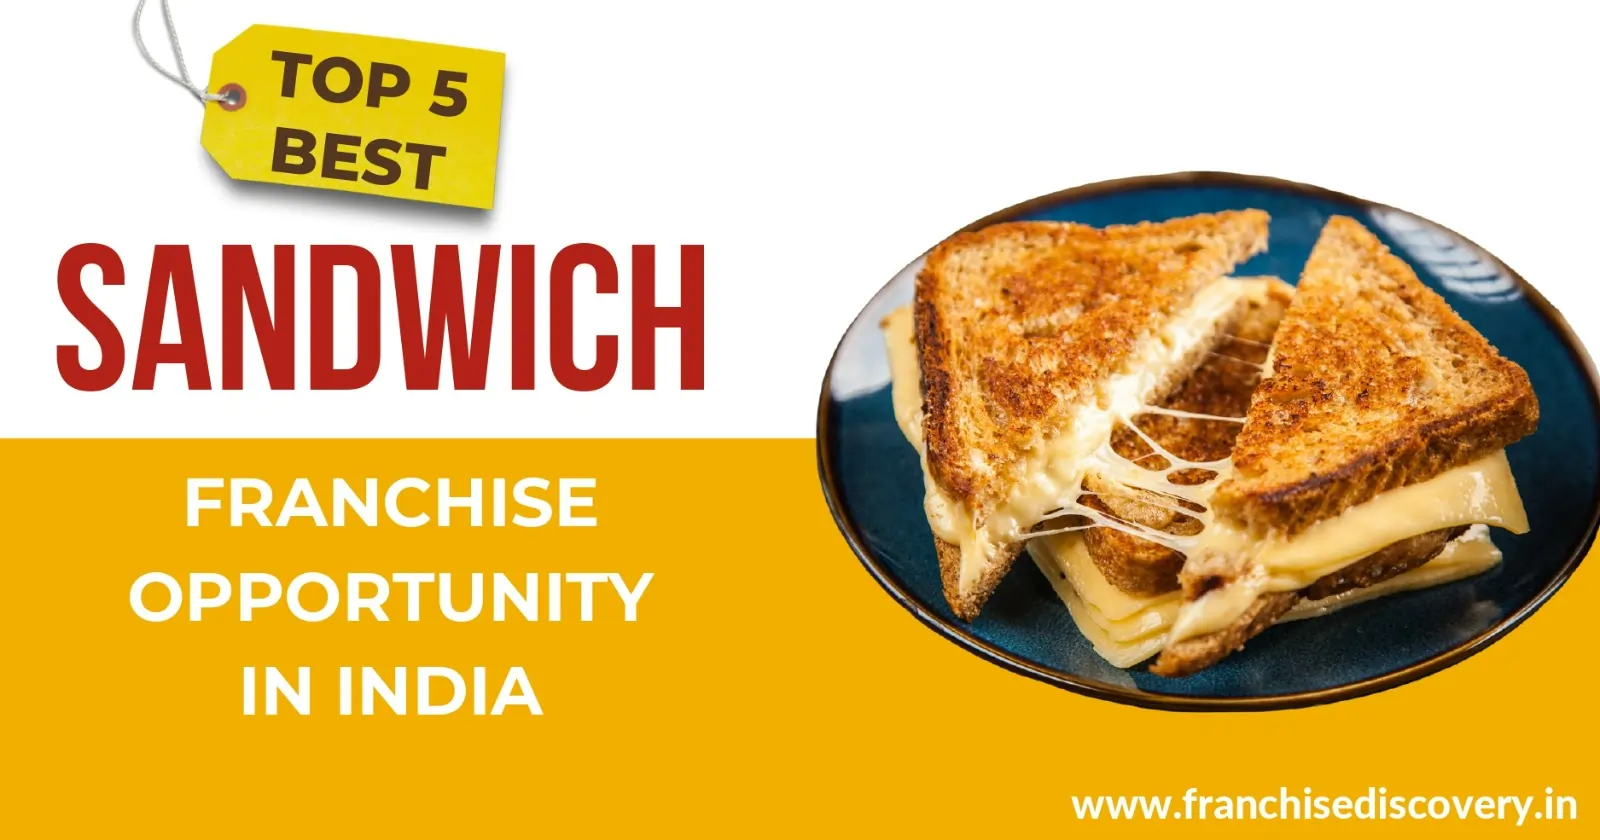 Top 5 best sandwich franchise business opportunities in India